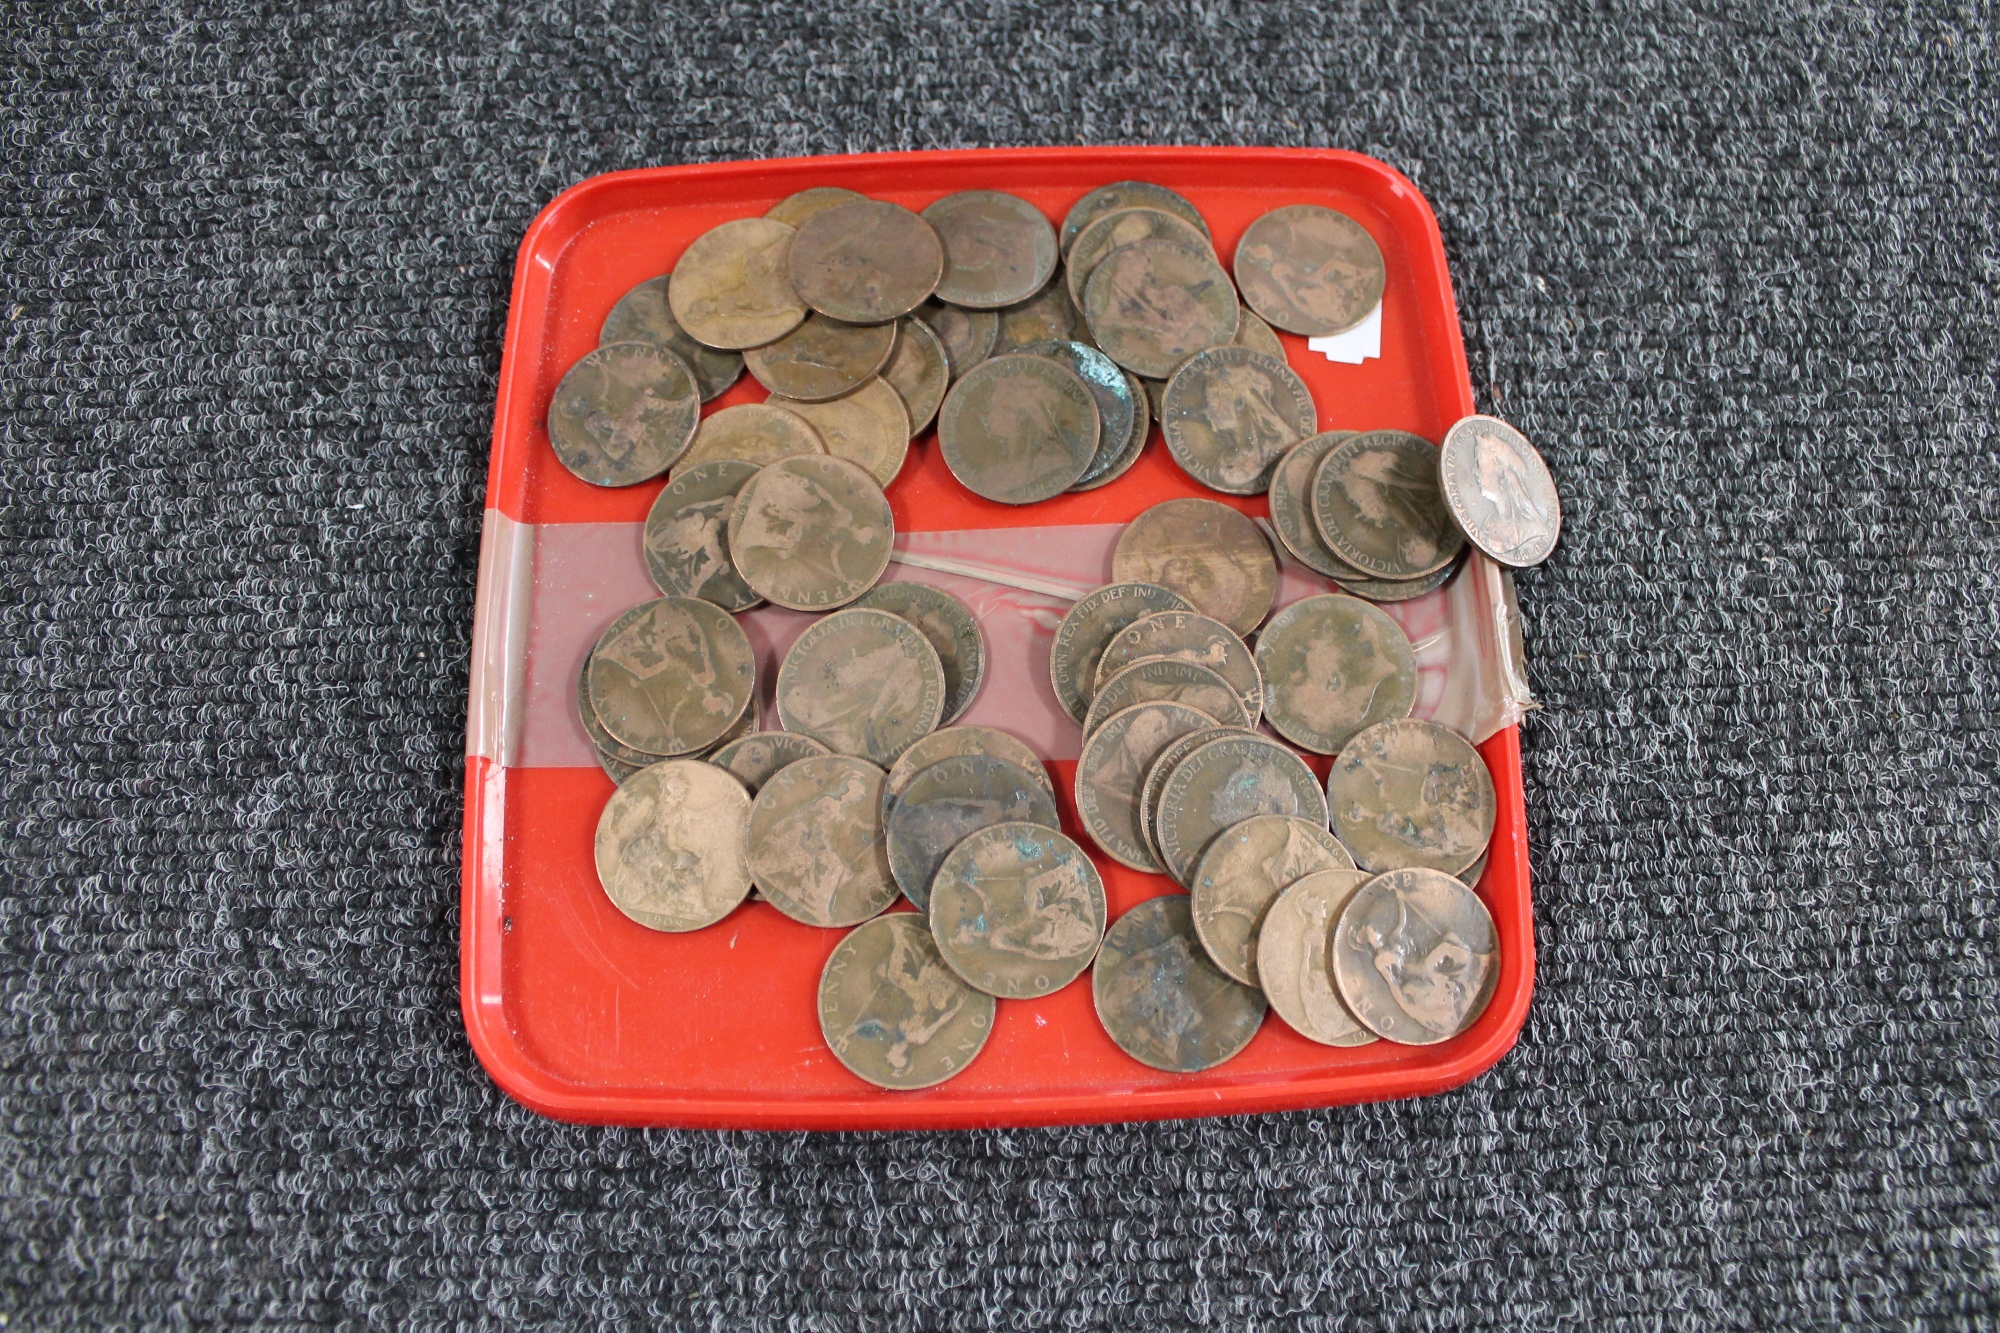 A quantity of Victorian and Georgian pennies